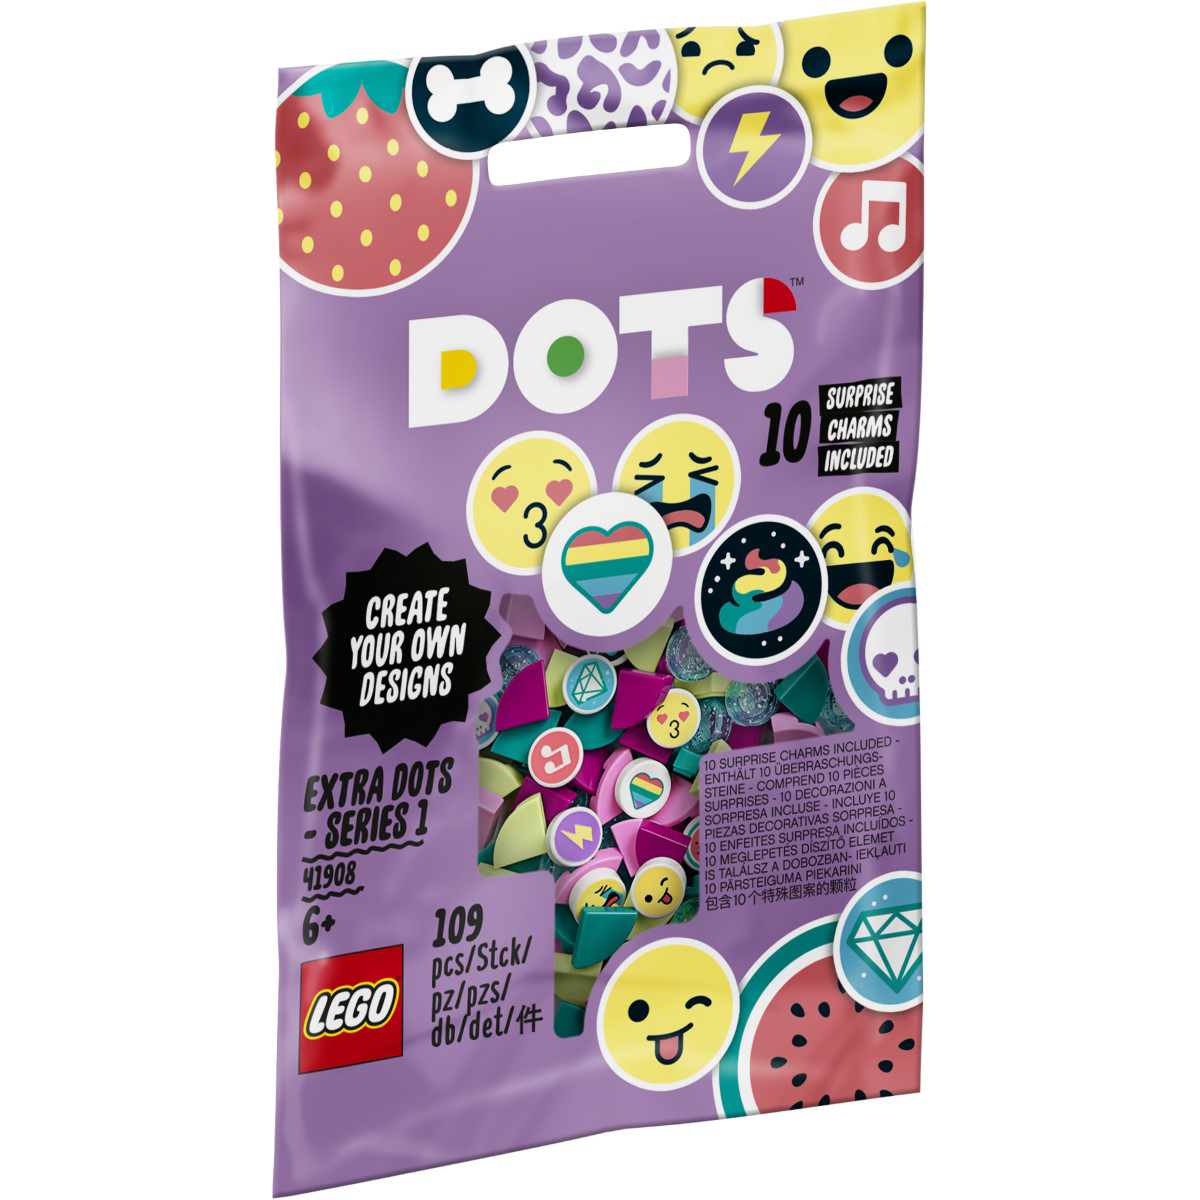 Lego DOTS 41908 Extra Serie 1